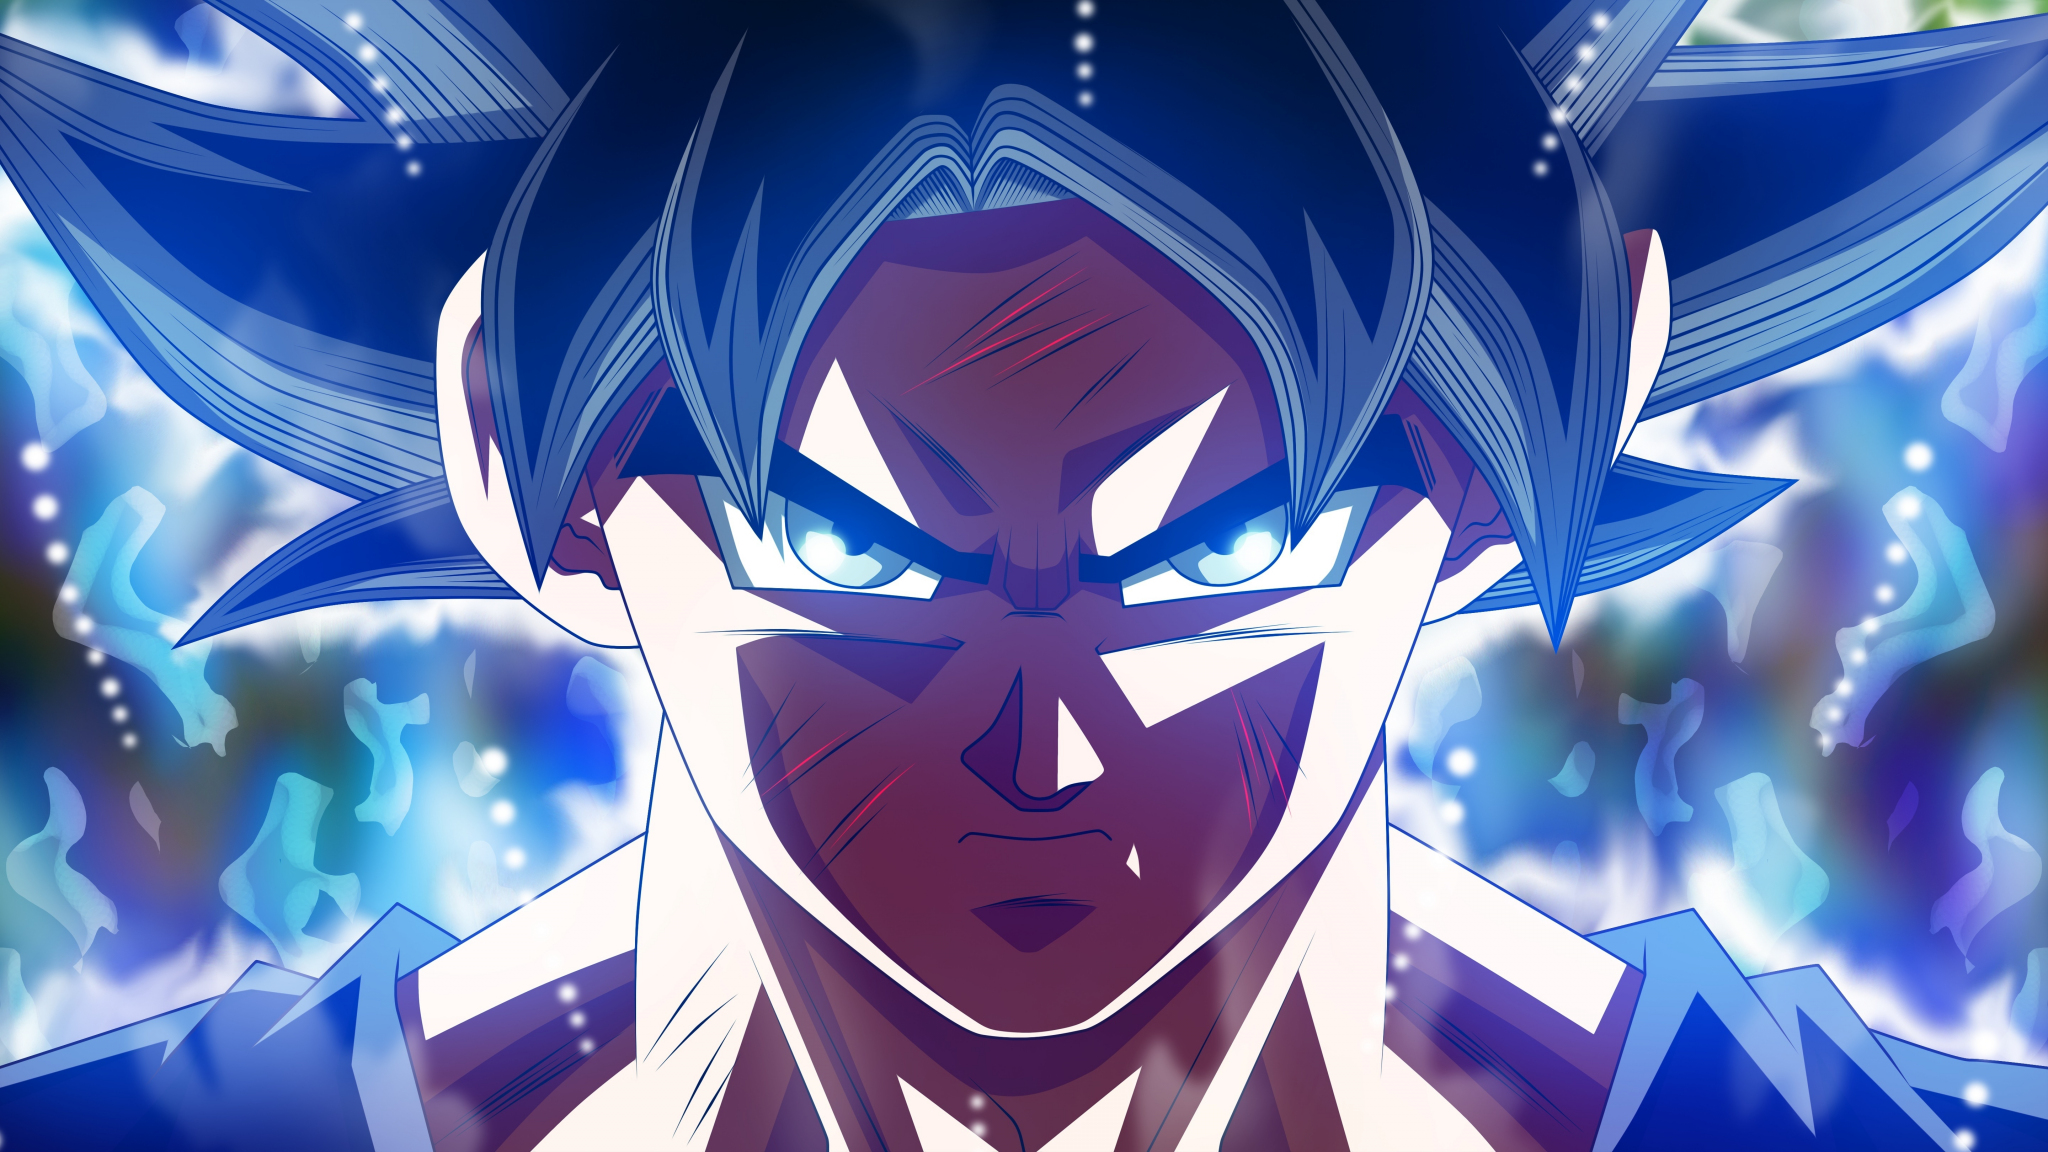 Download 48x1152 Wallpaper Wounded Son Goku Ultra Instinct Dragon Ball Super Dual Wide Widescreen 48x1152 Hd Image Background 4626